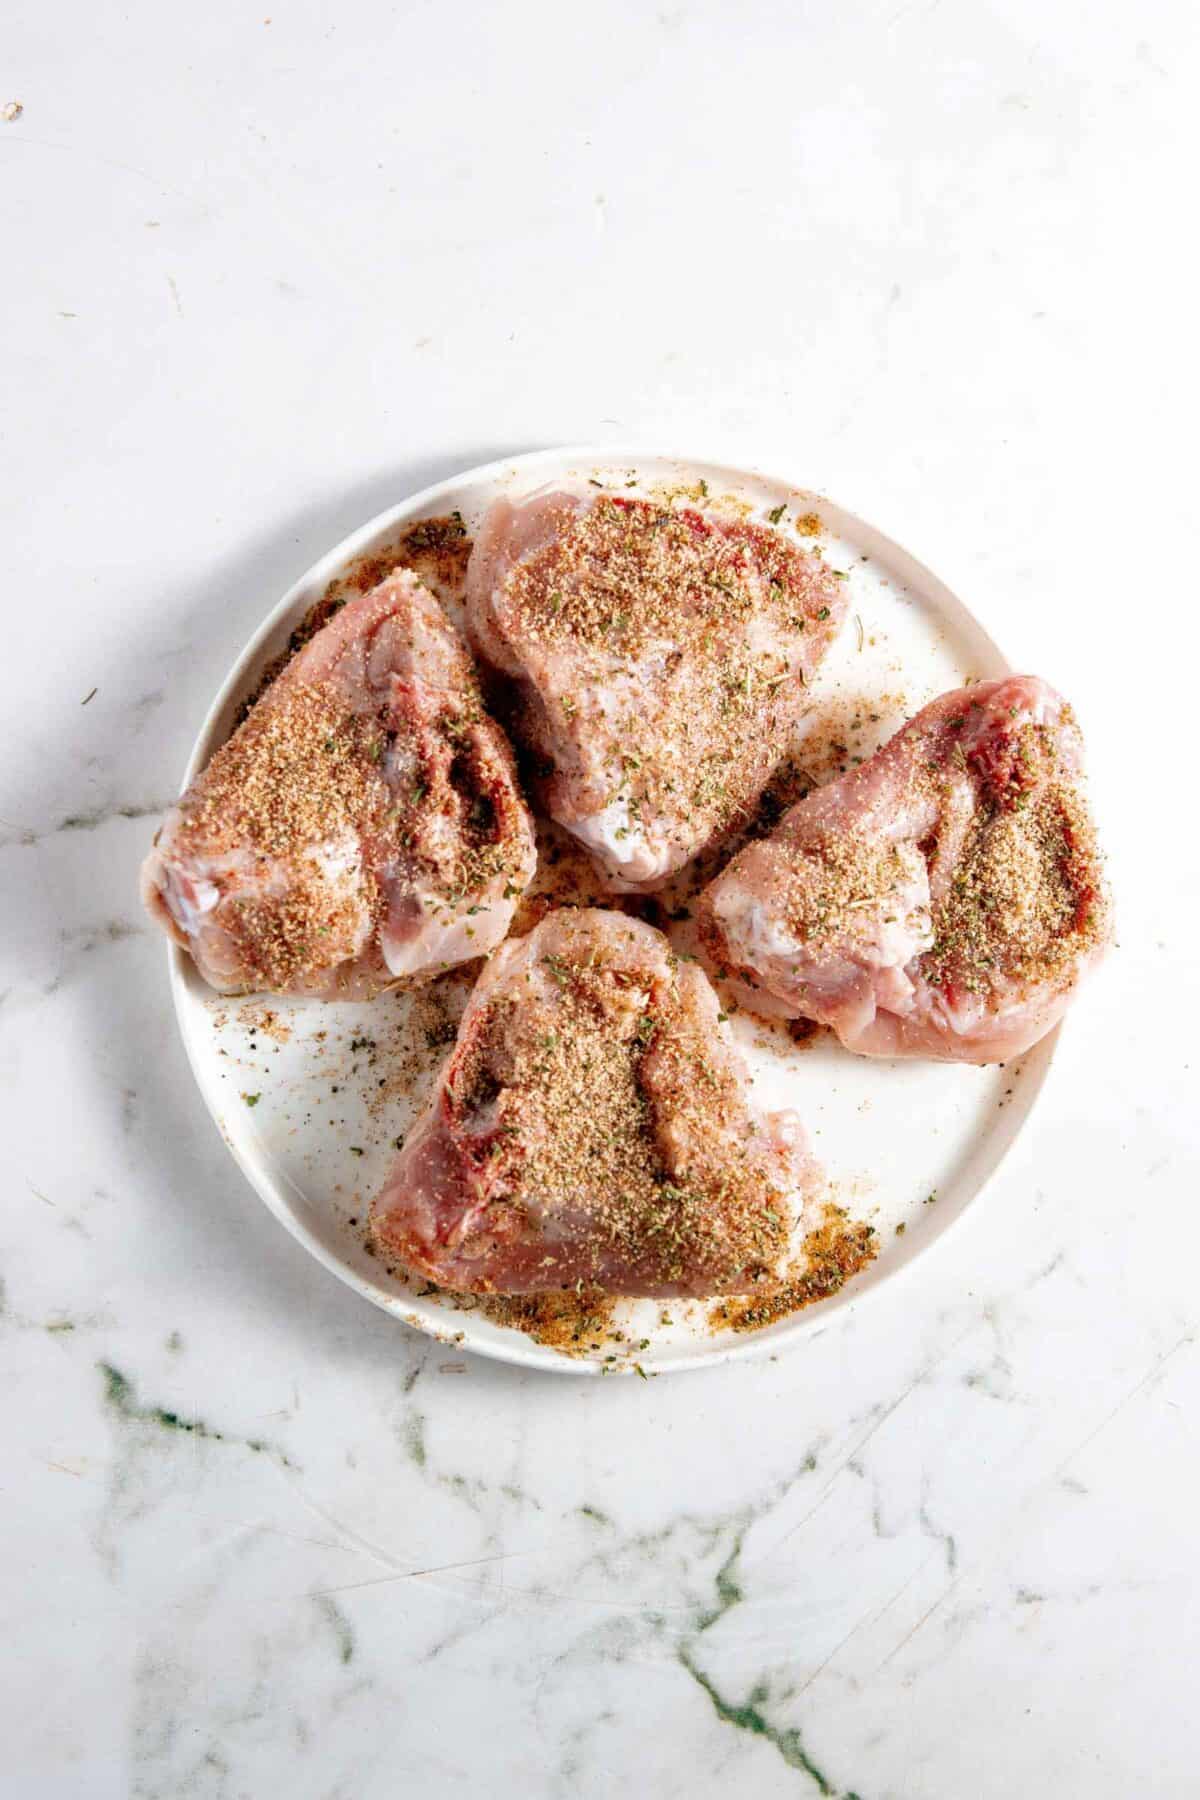 Chicken thighs rubbed with spices.